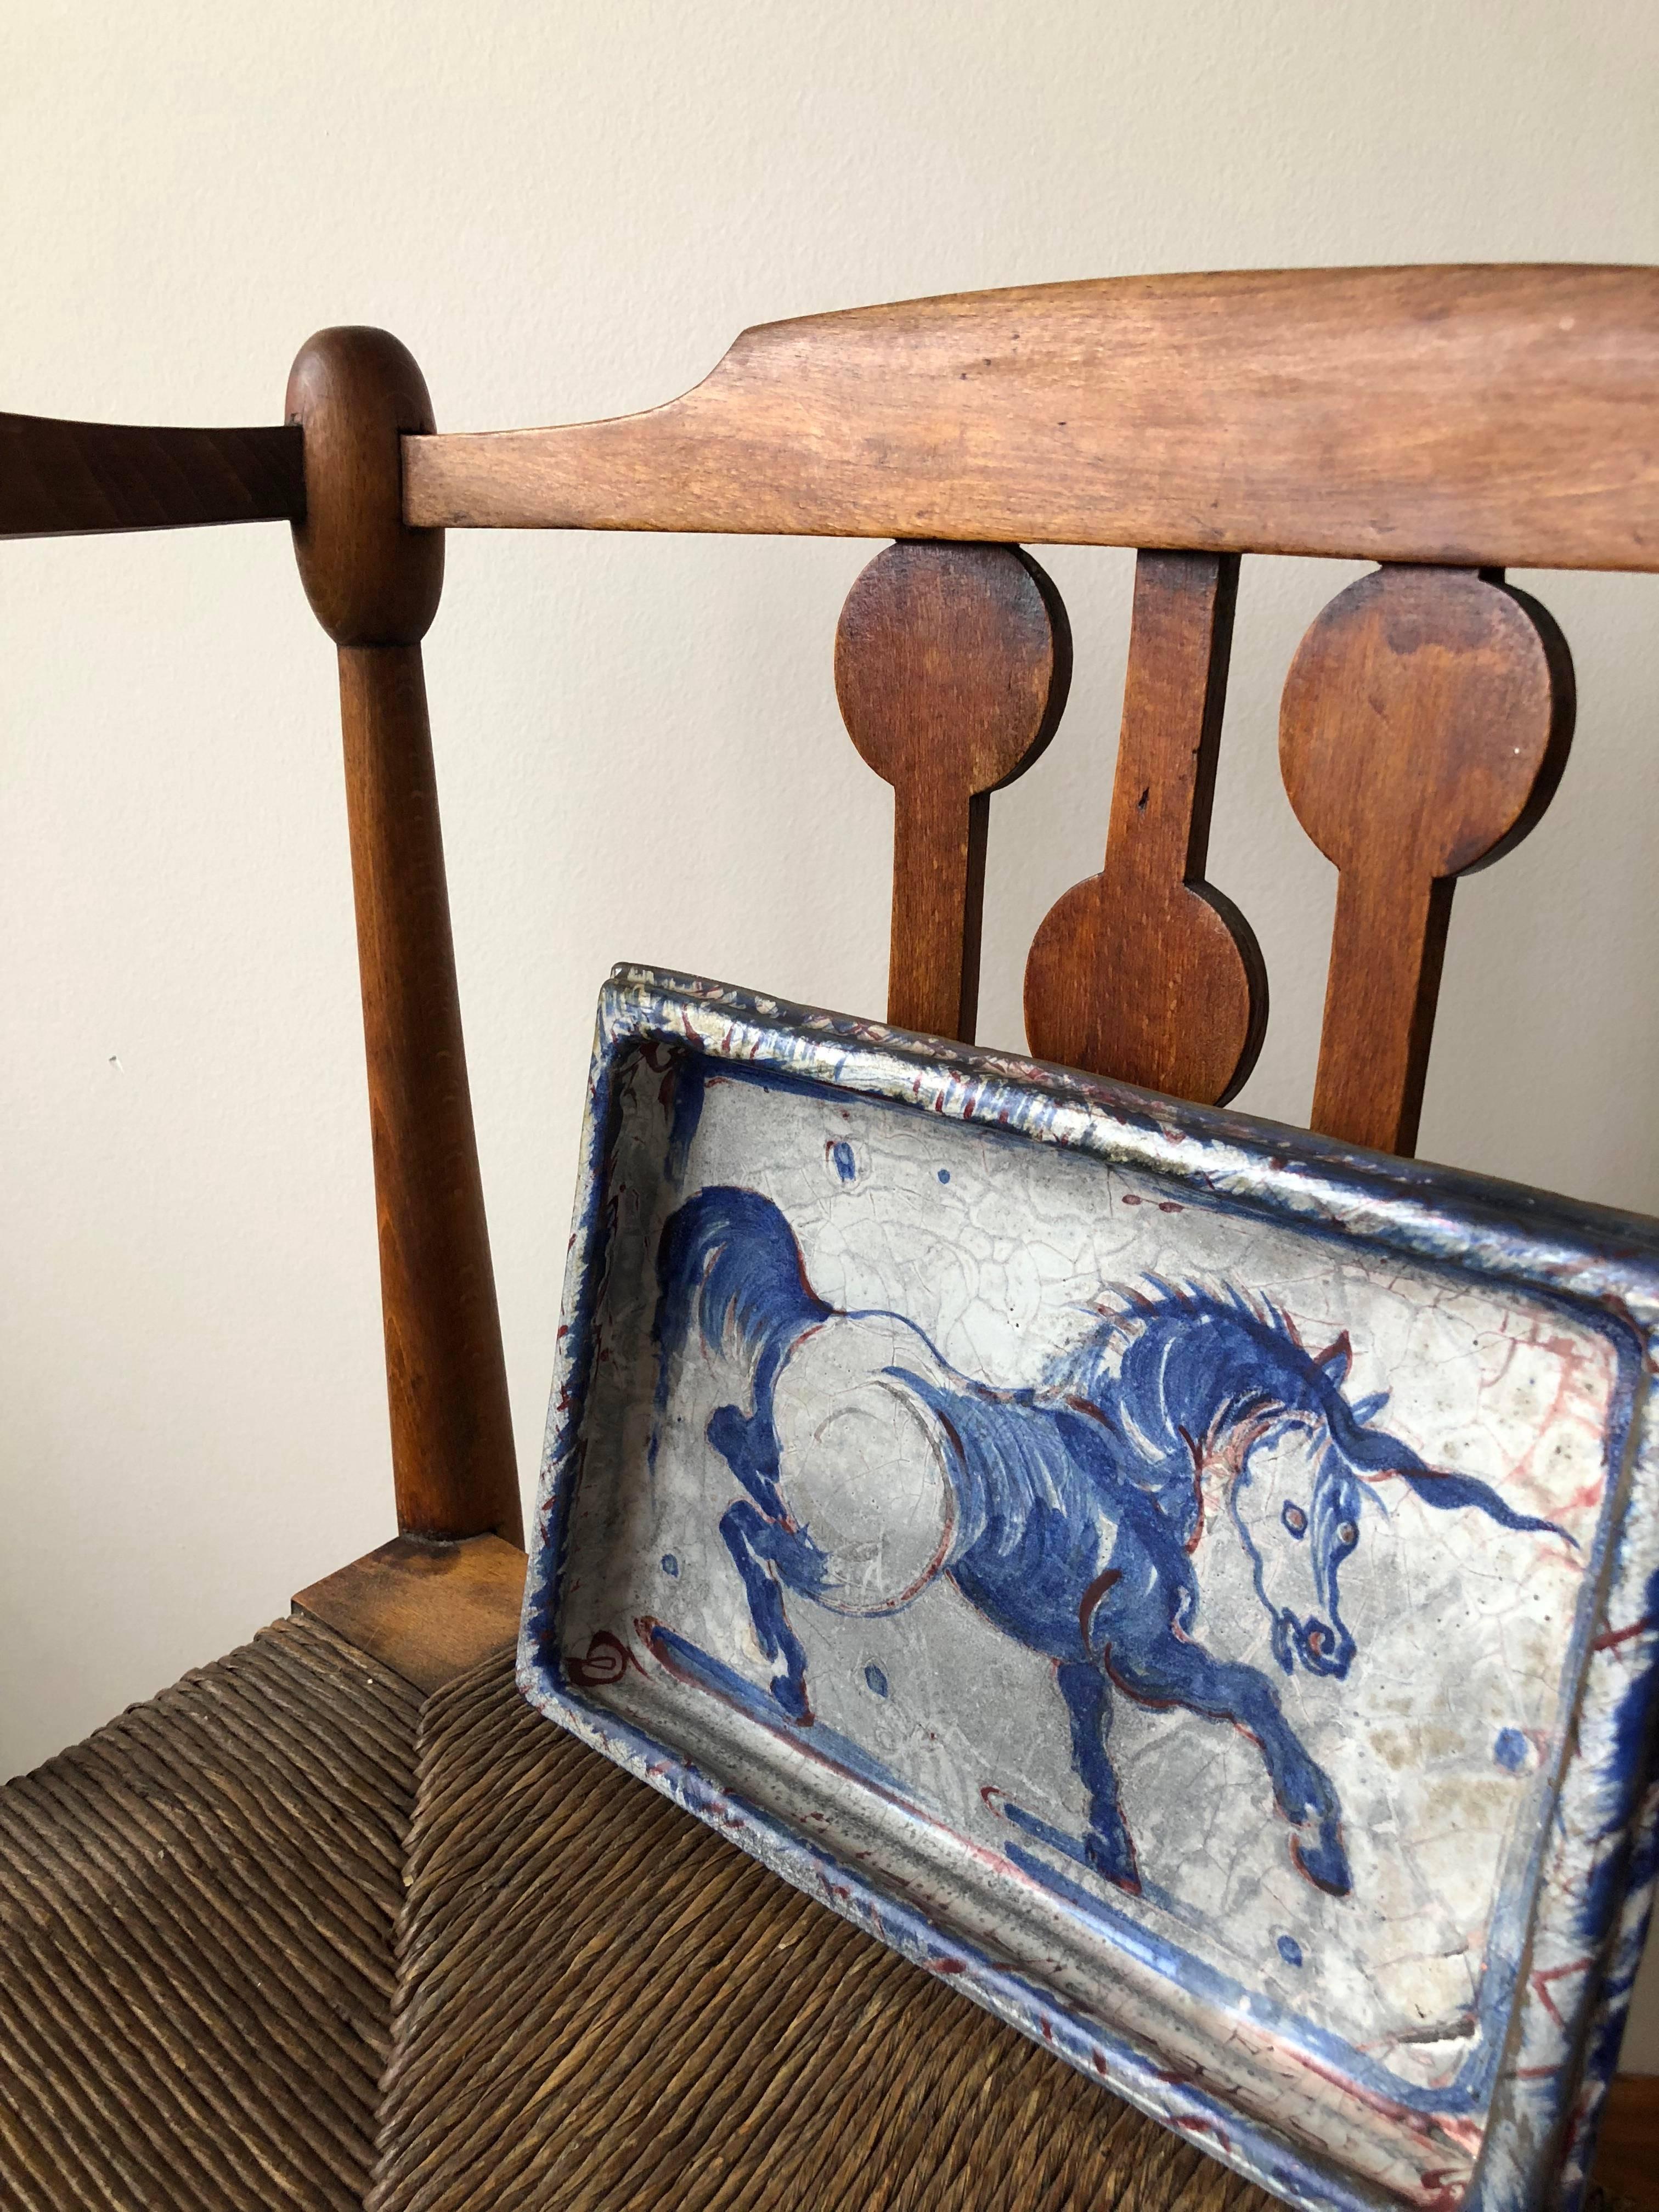 Unicorn wall plaque (or dish), 19th/ Early 20th century.